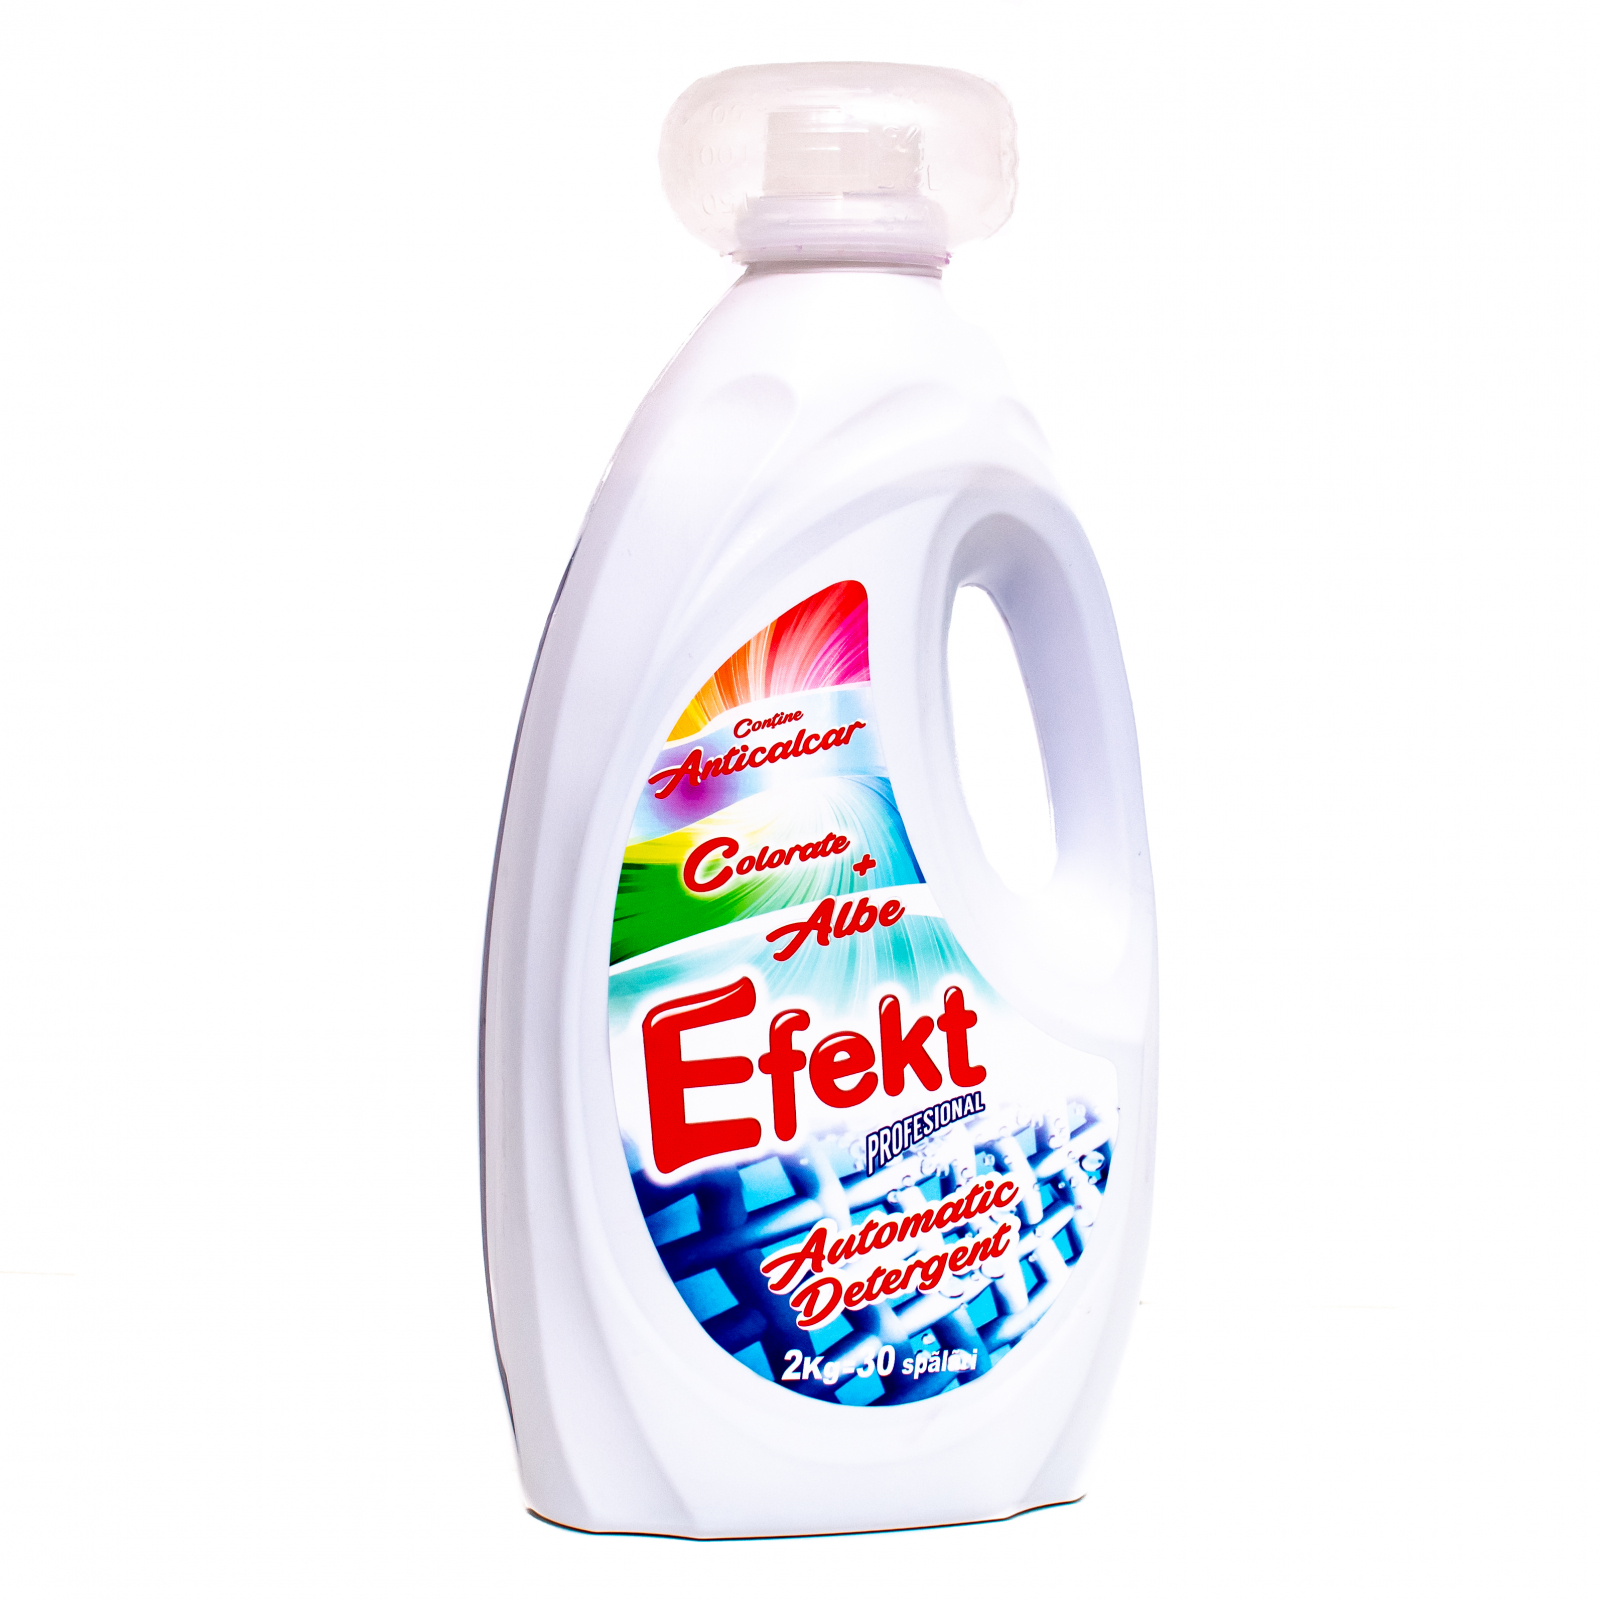 And so on Out of breath chapter Detergent Lichid pentru rufe, Efekt, 2kg, 30 spalari